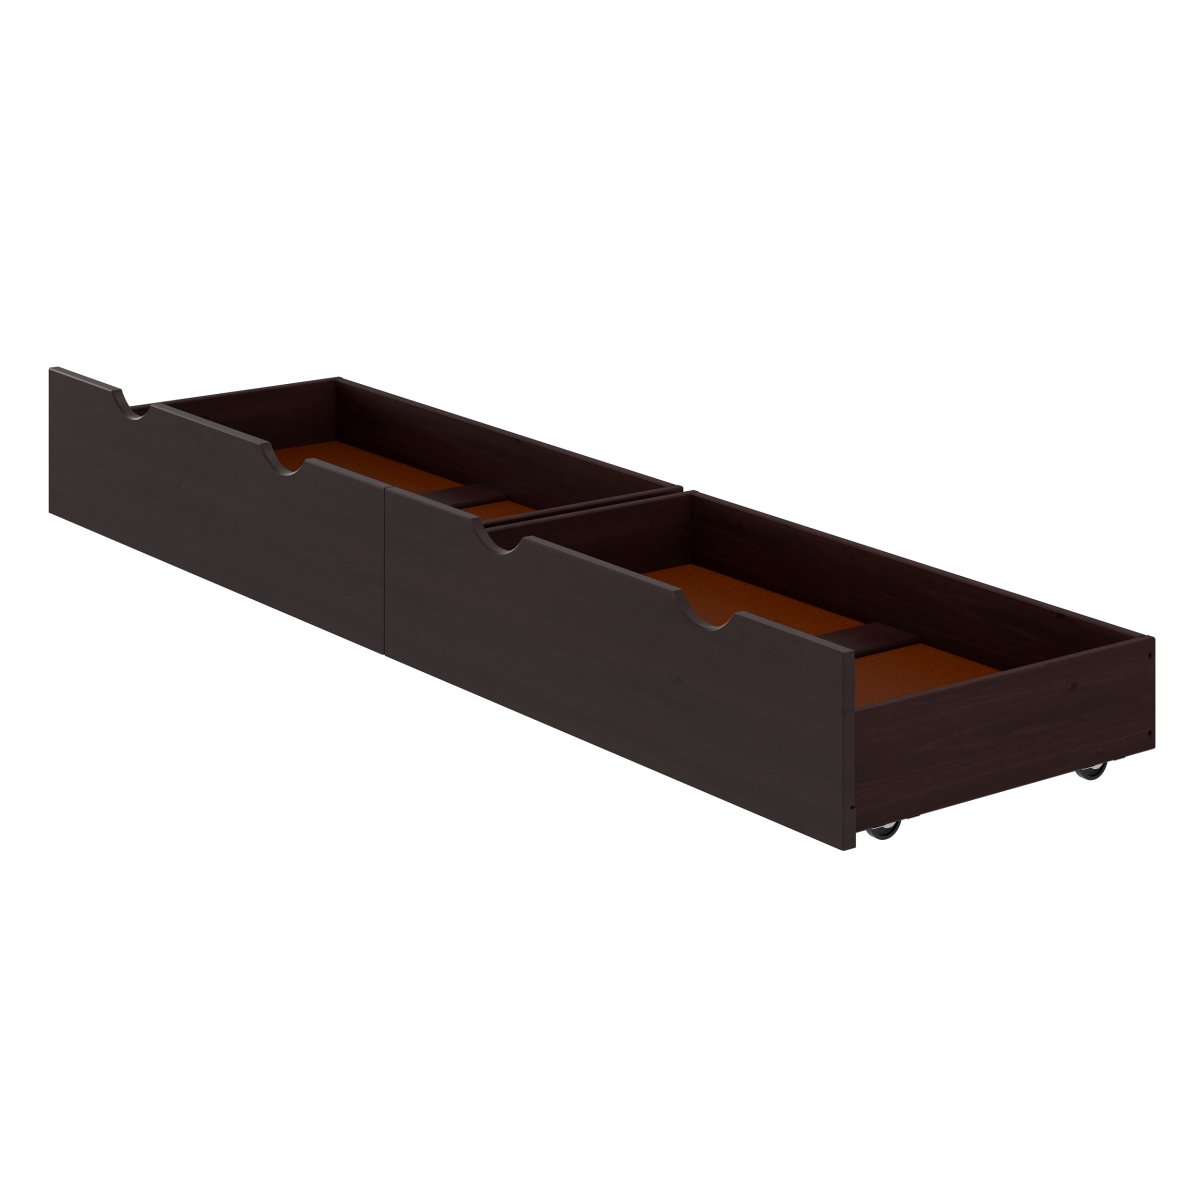 Picture of Alaterre AJ0049P0 Underbed Storage Drawers, Espresso - Set of 2